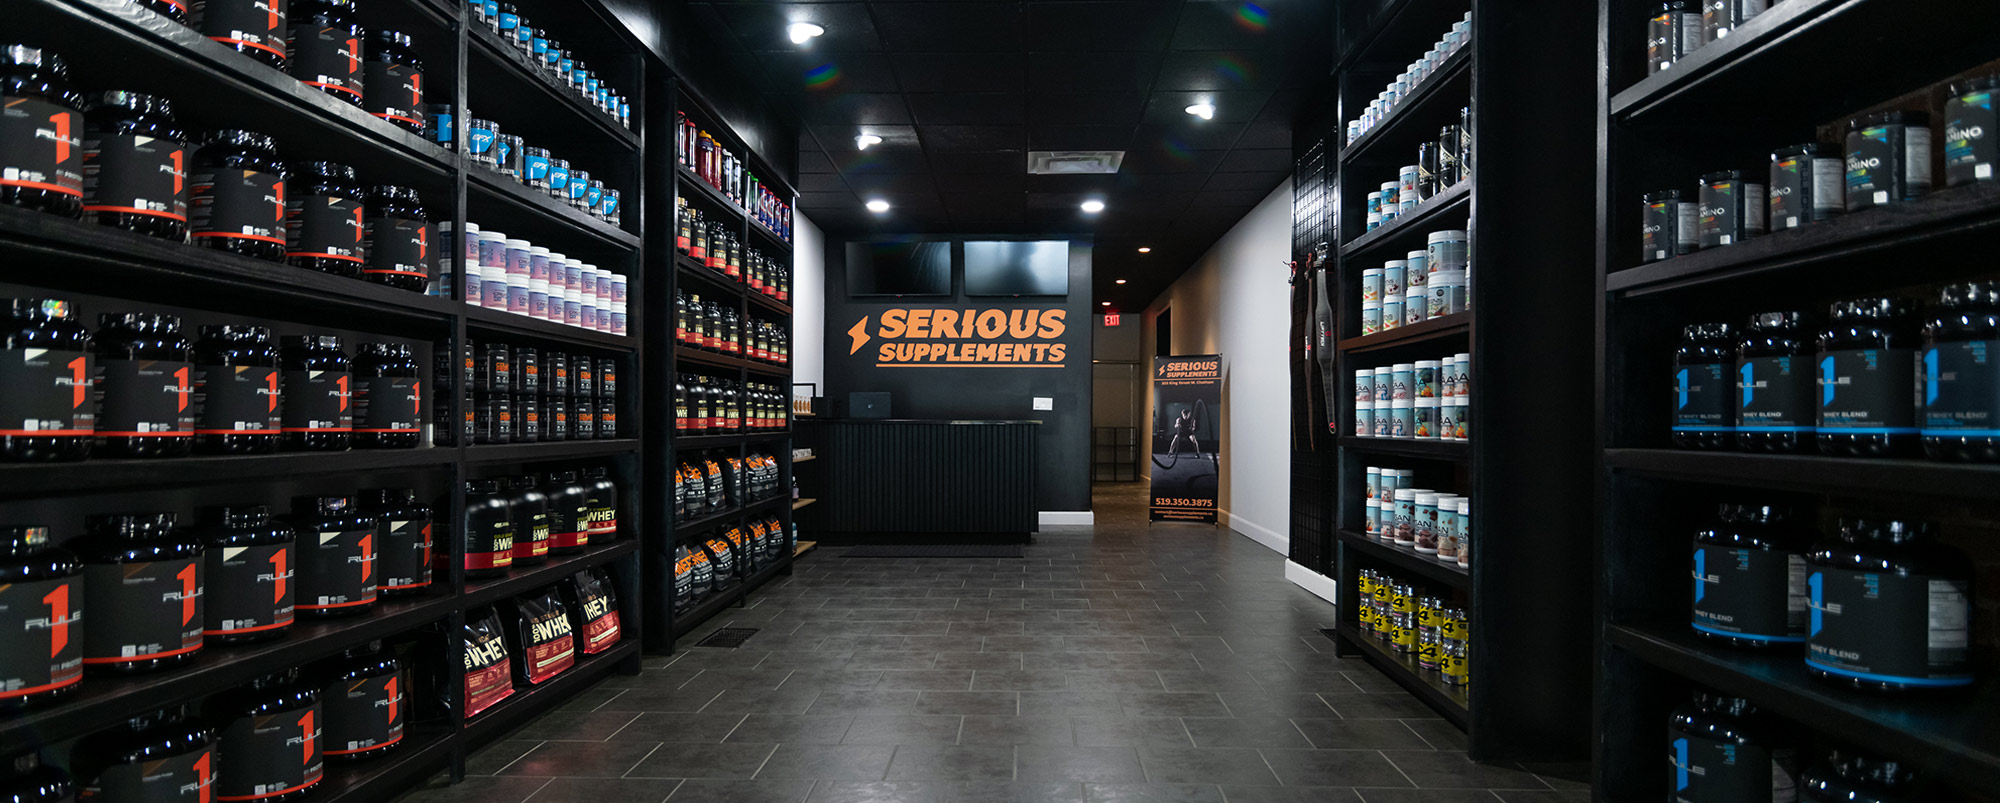 Serious Supplements Store Chatham Ontario Canada